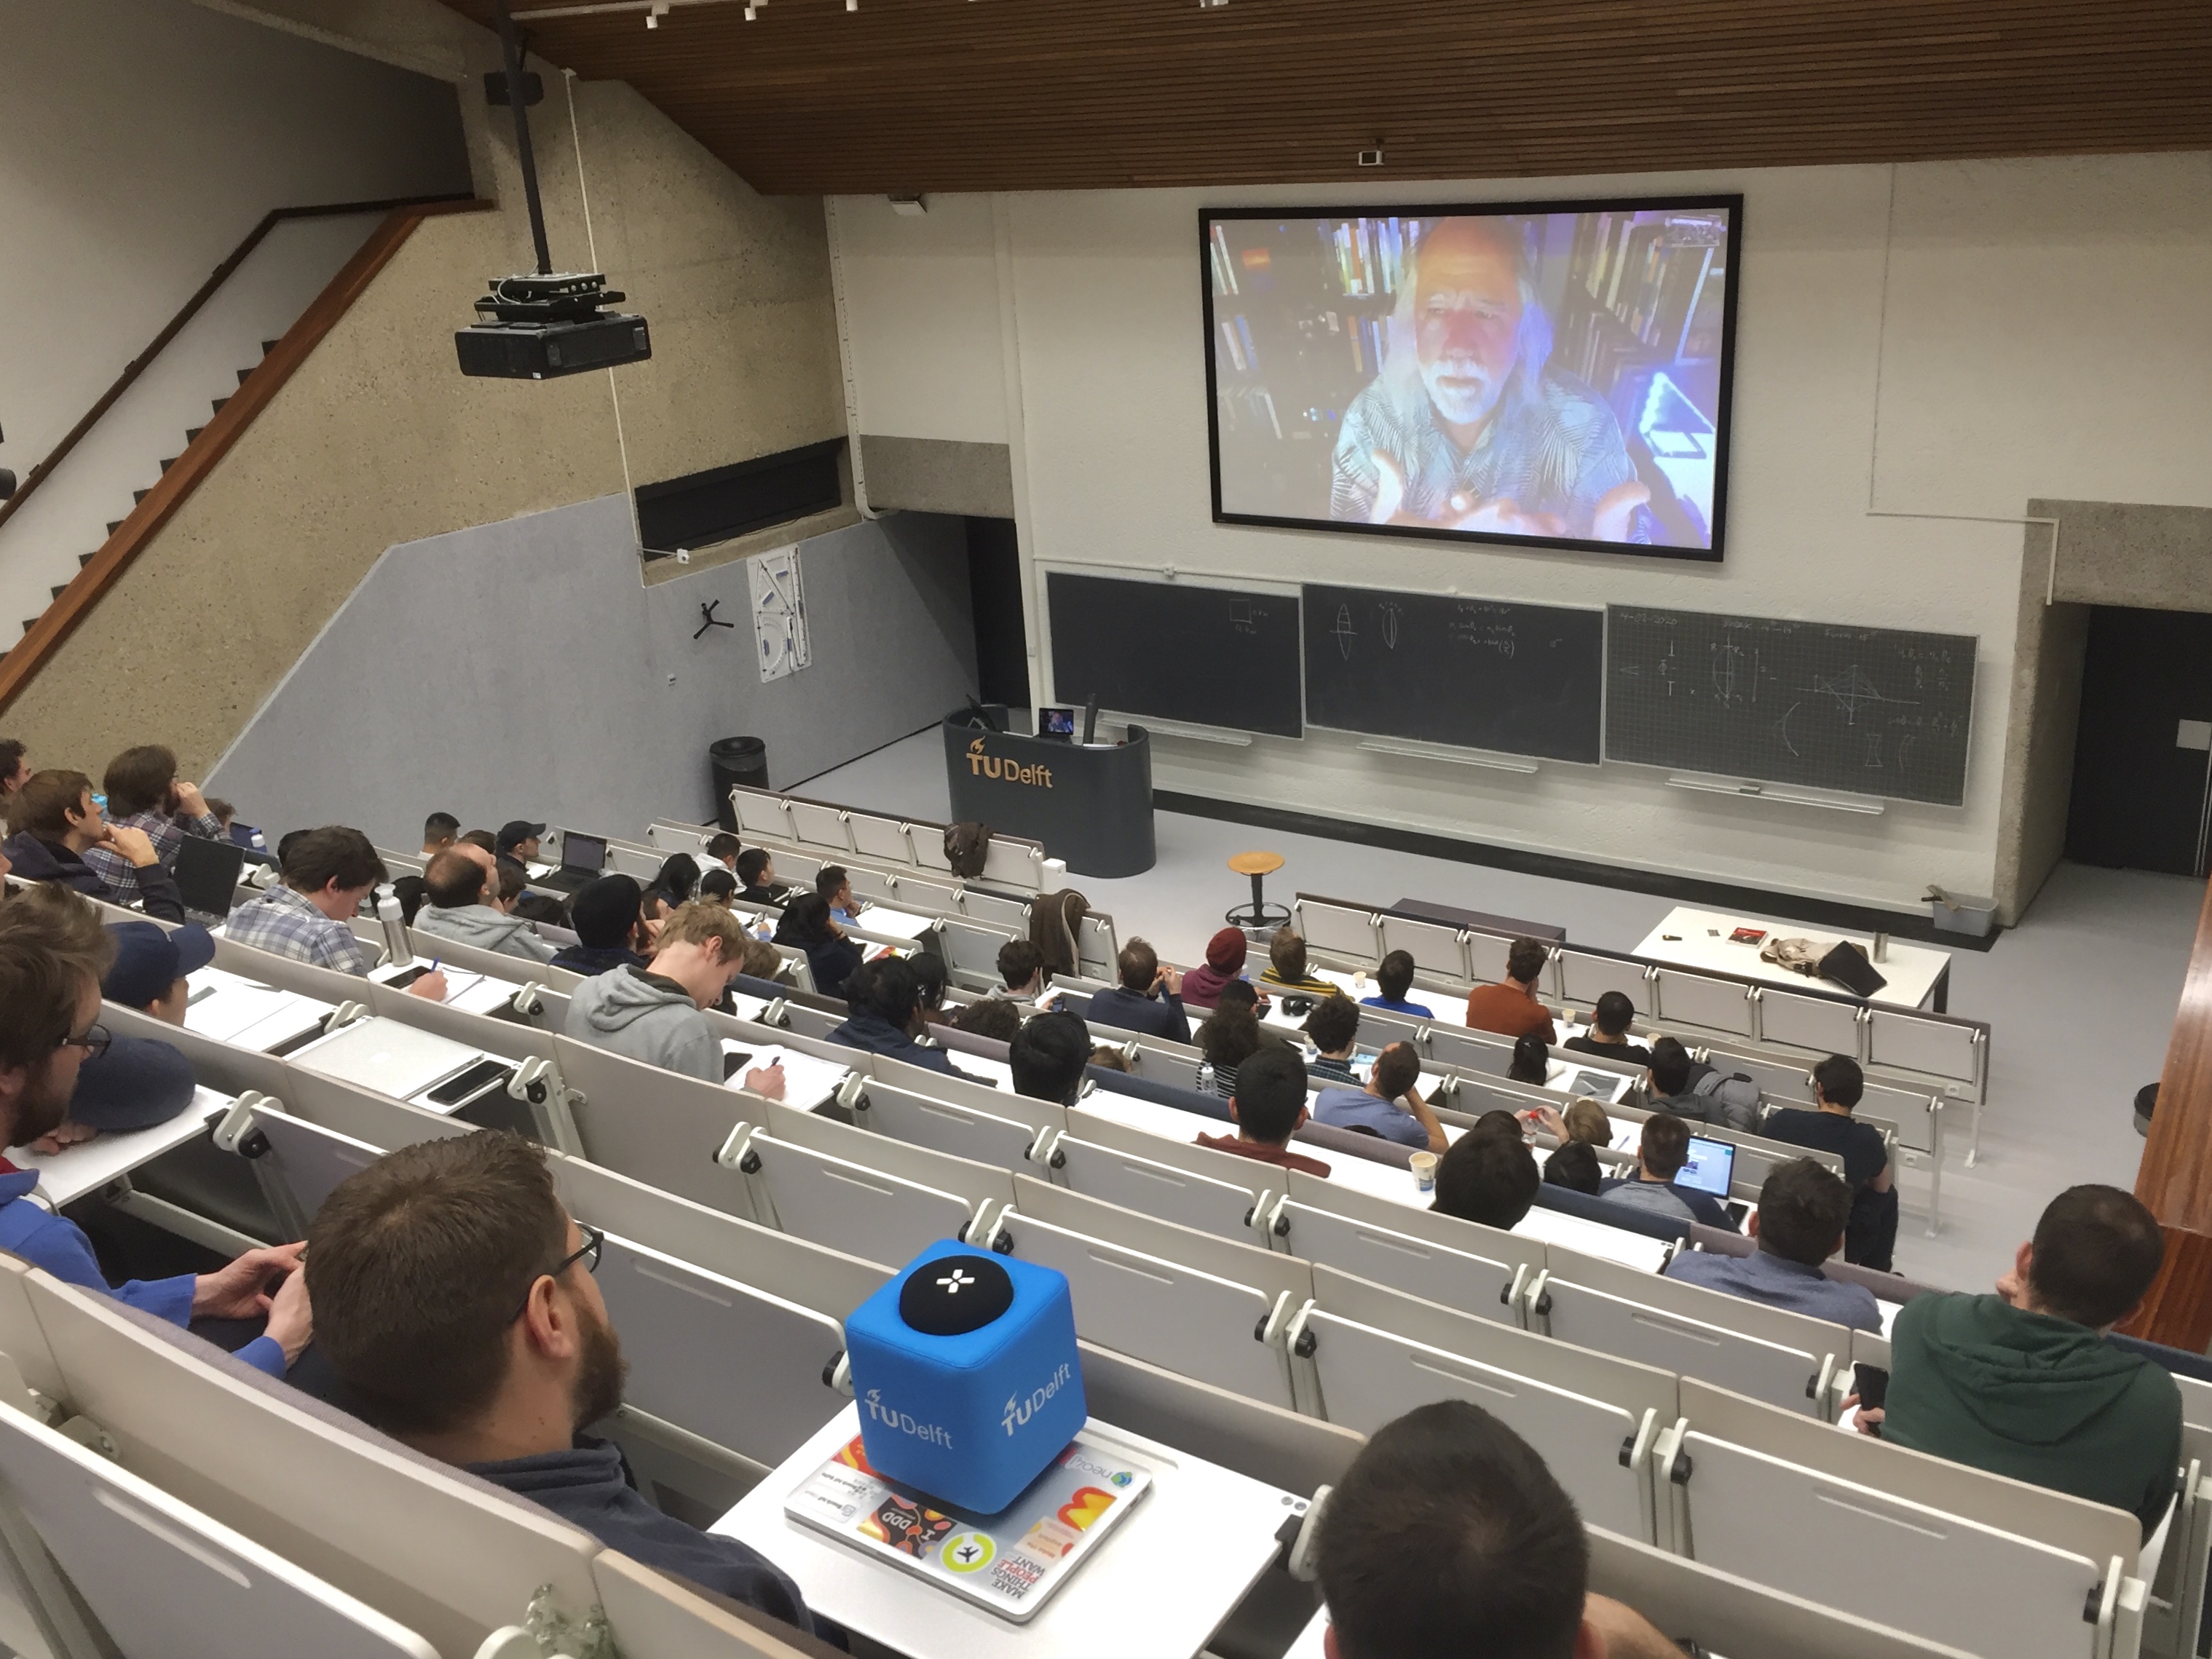 Pre-Corona: Ask-Me-Anything over Skype with Grady Booch, in TU Delft lecture hall, February 2020